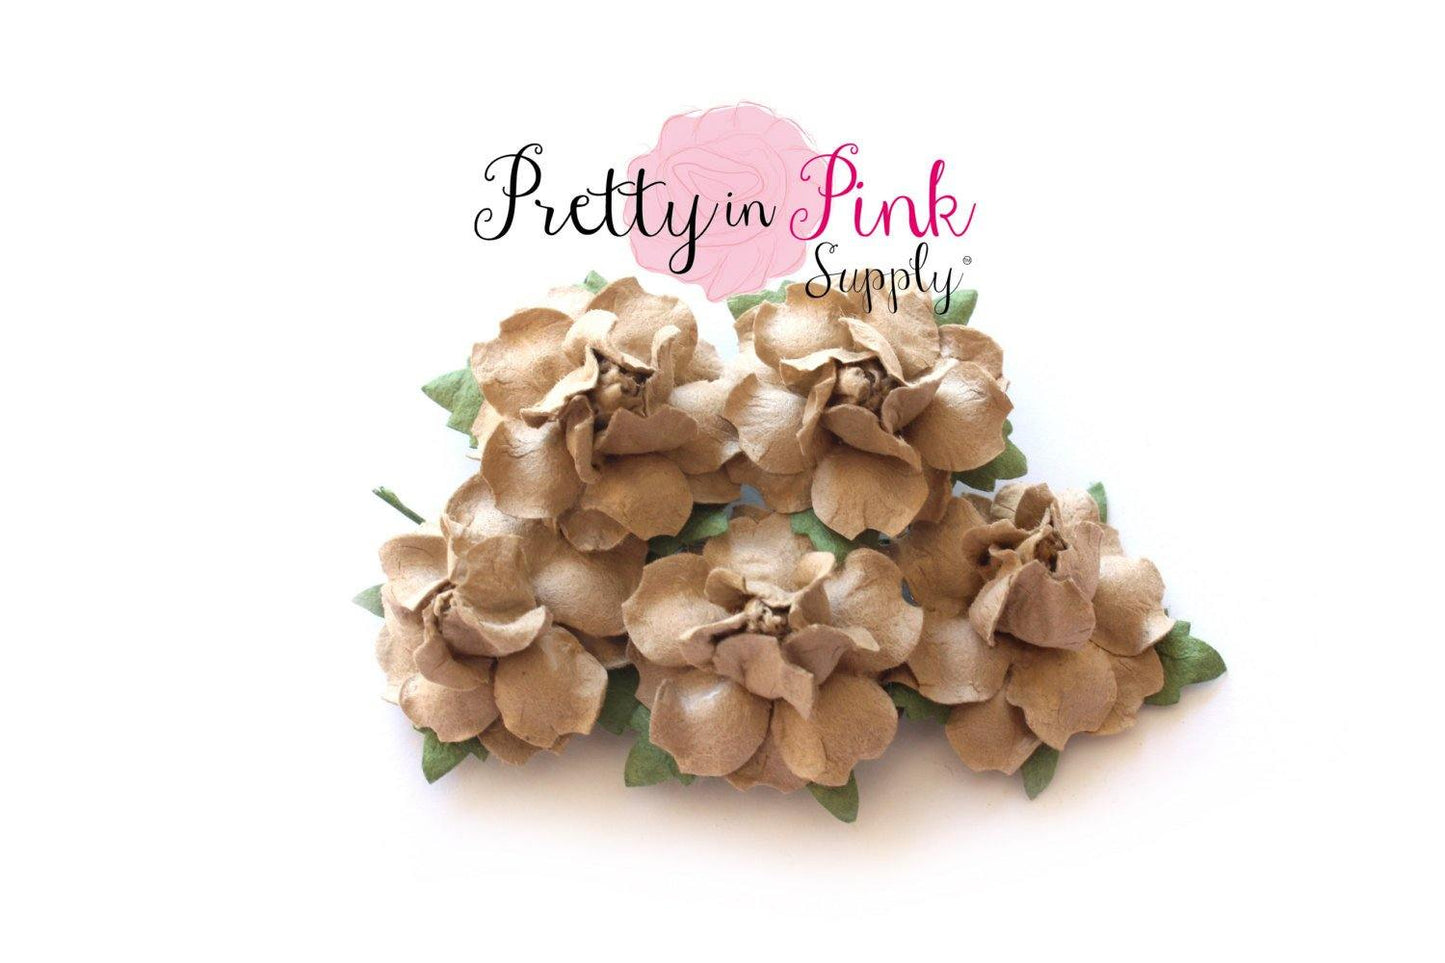 1" PREMIUM Natural Paper Flowers - Pretty in Pink Supply